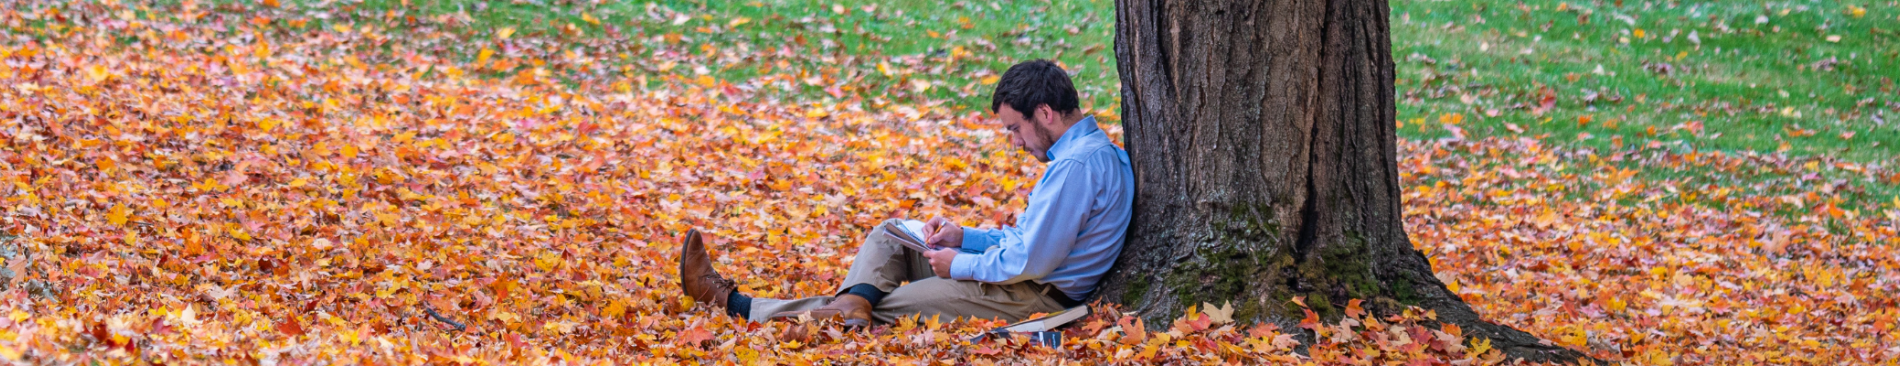 Student reads under a tree